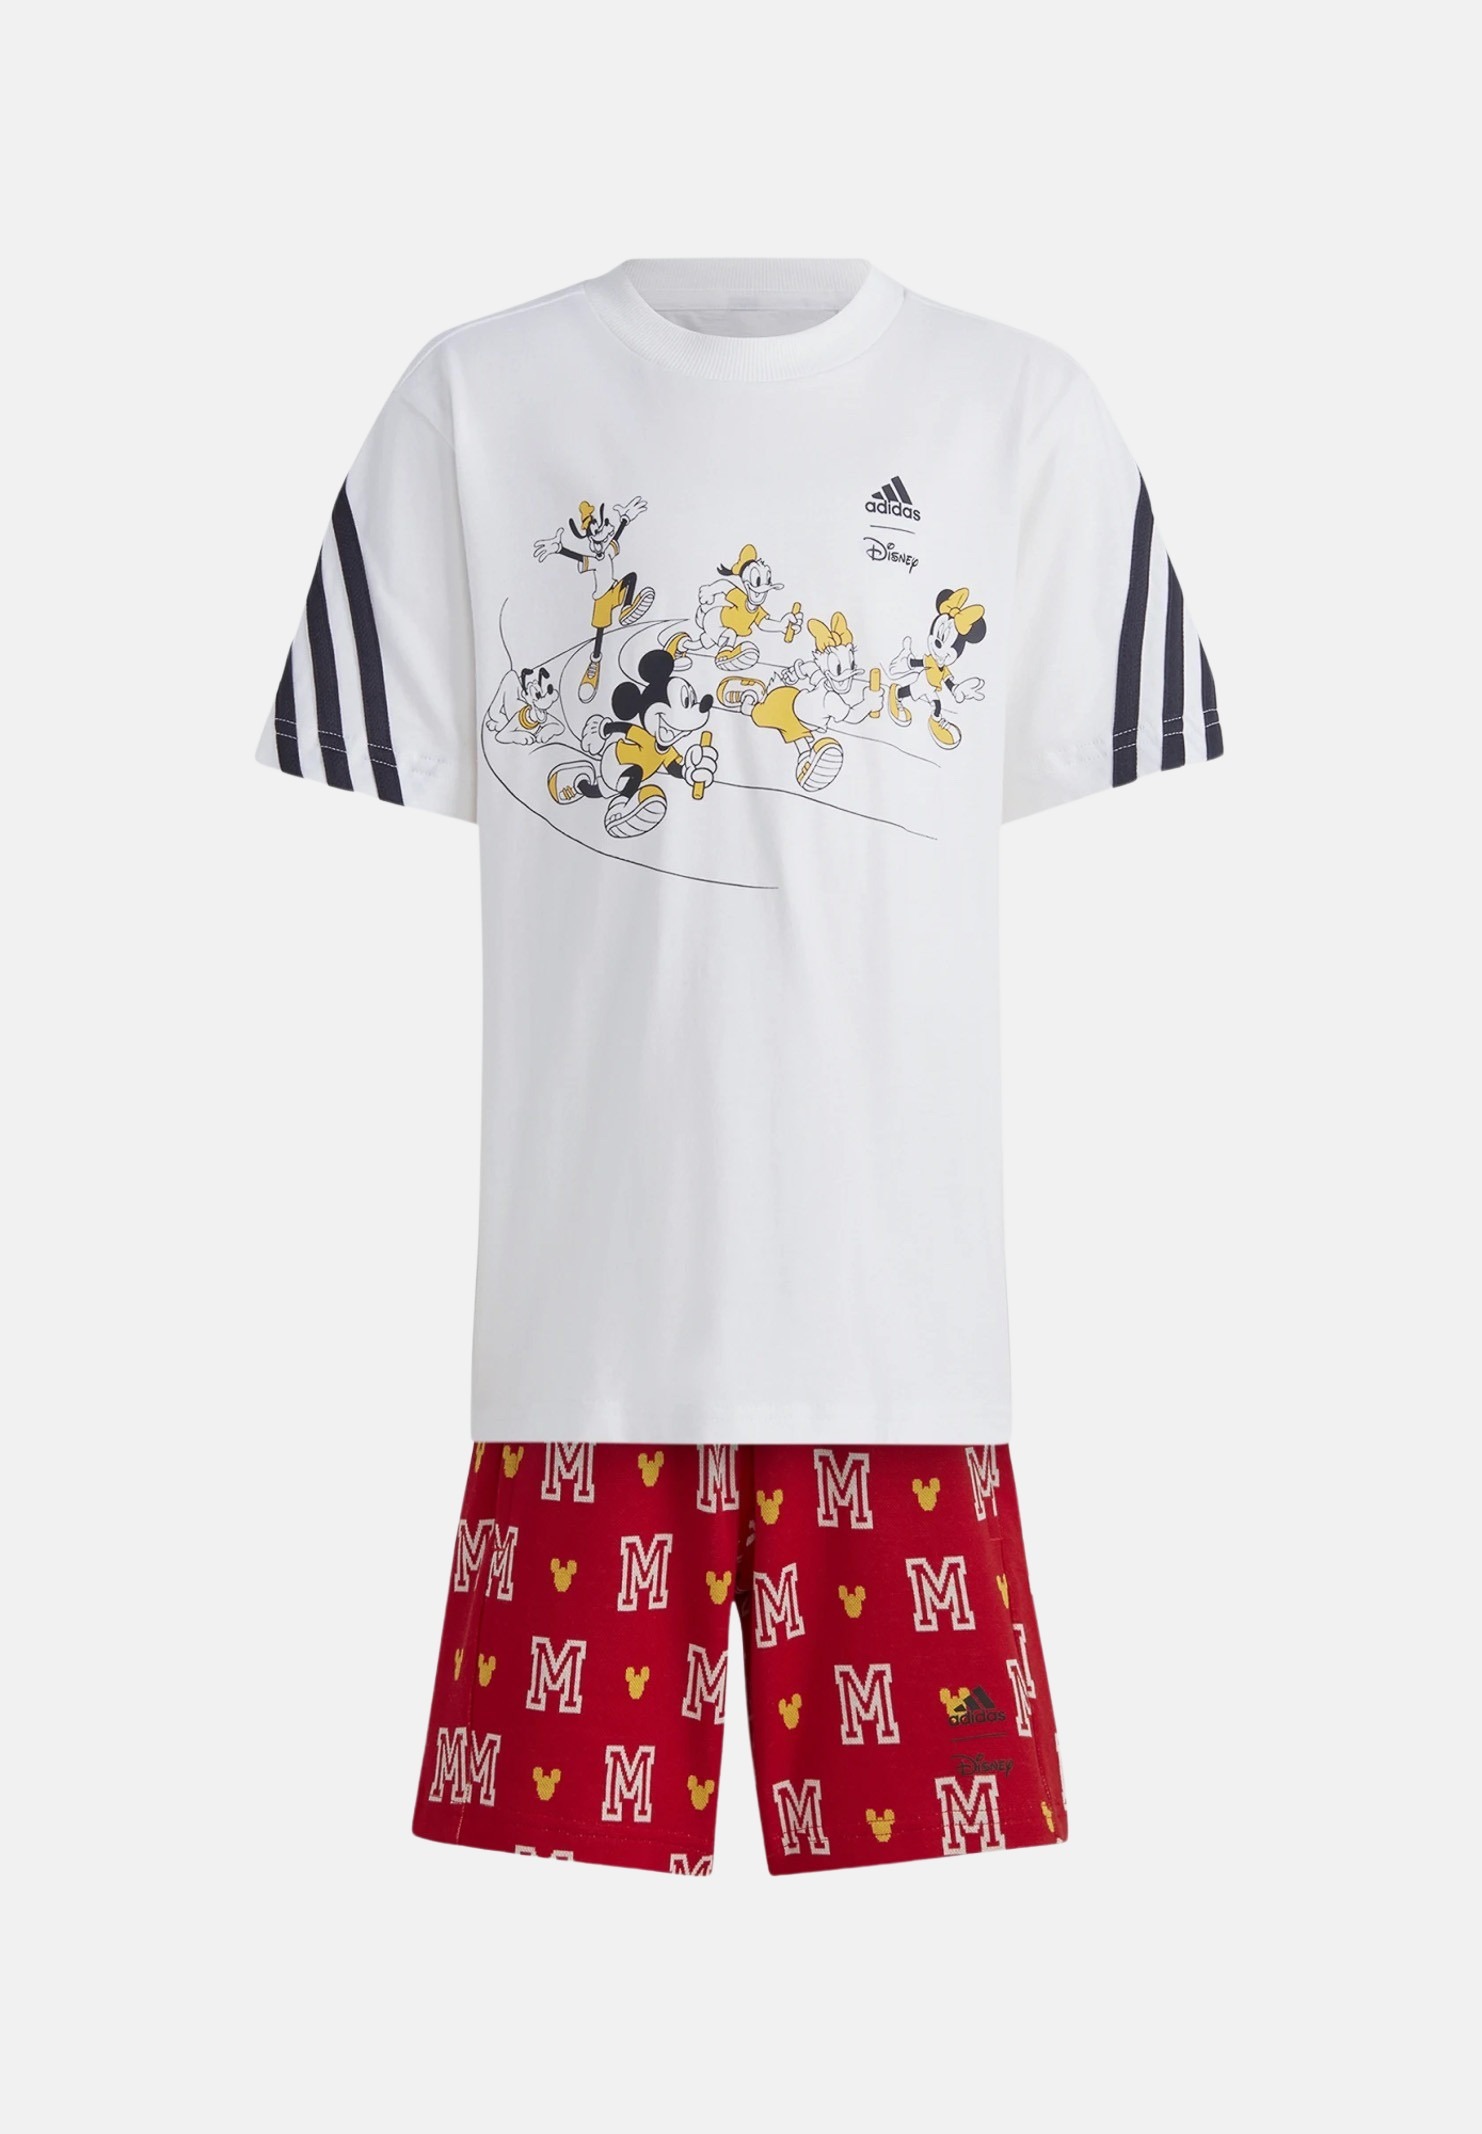 Adidas x Mickey Mouse two-tone outfit for kids ADIDAS | HR9498.